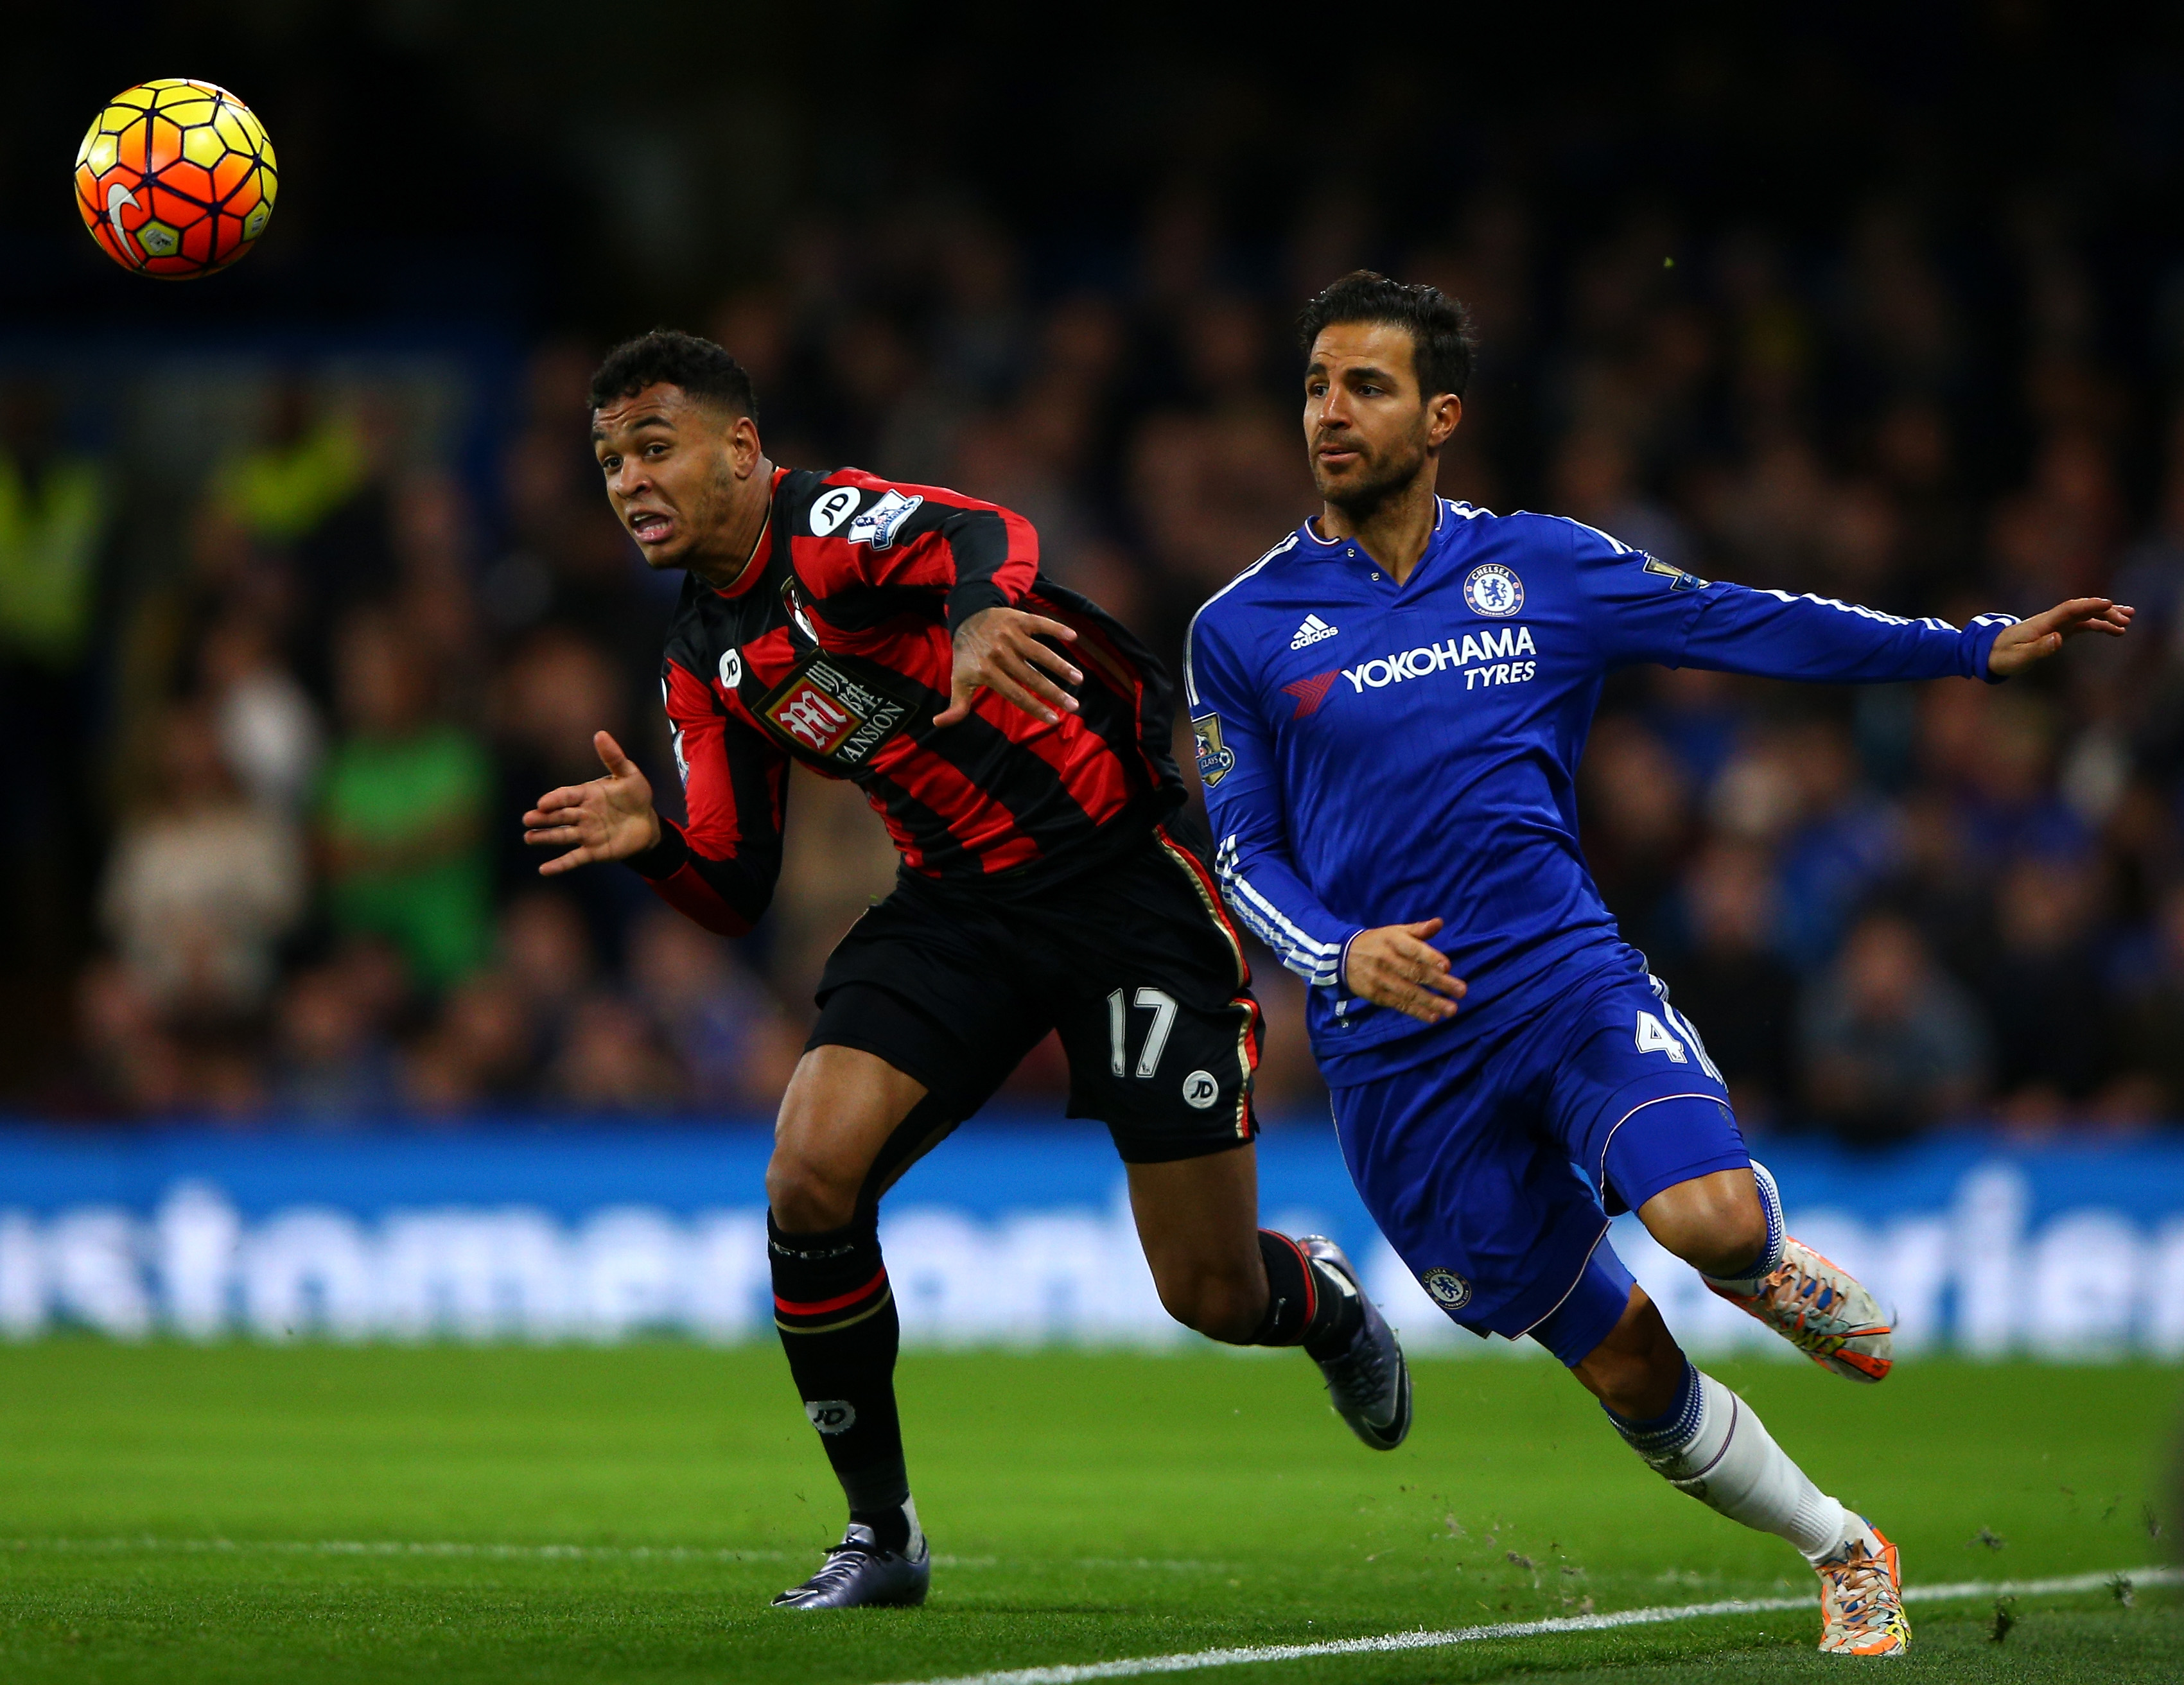 LONDON, ENGLAND - DECEMBER 05: Joshua King of Bournemouth and Cesc Fabregas of Chelsea compete for the ball during the Barclays Premier League match between Chelsea and A.F.C. Bournemouth at Stamford Bridge on December 5, 2015 in London, England.  (Photo by Ian Walton/Getty Images)